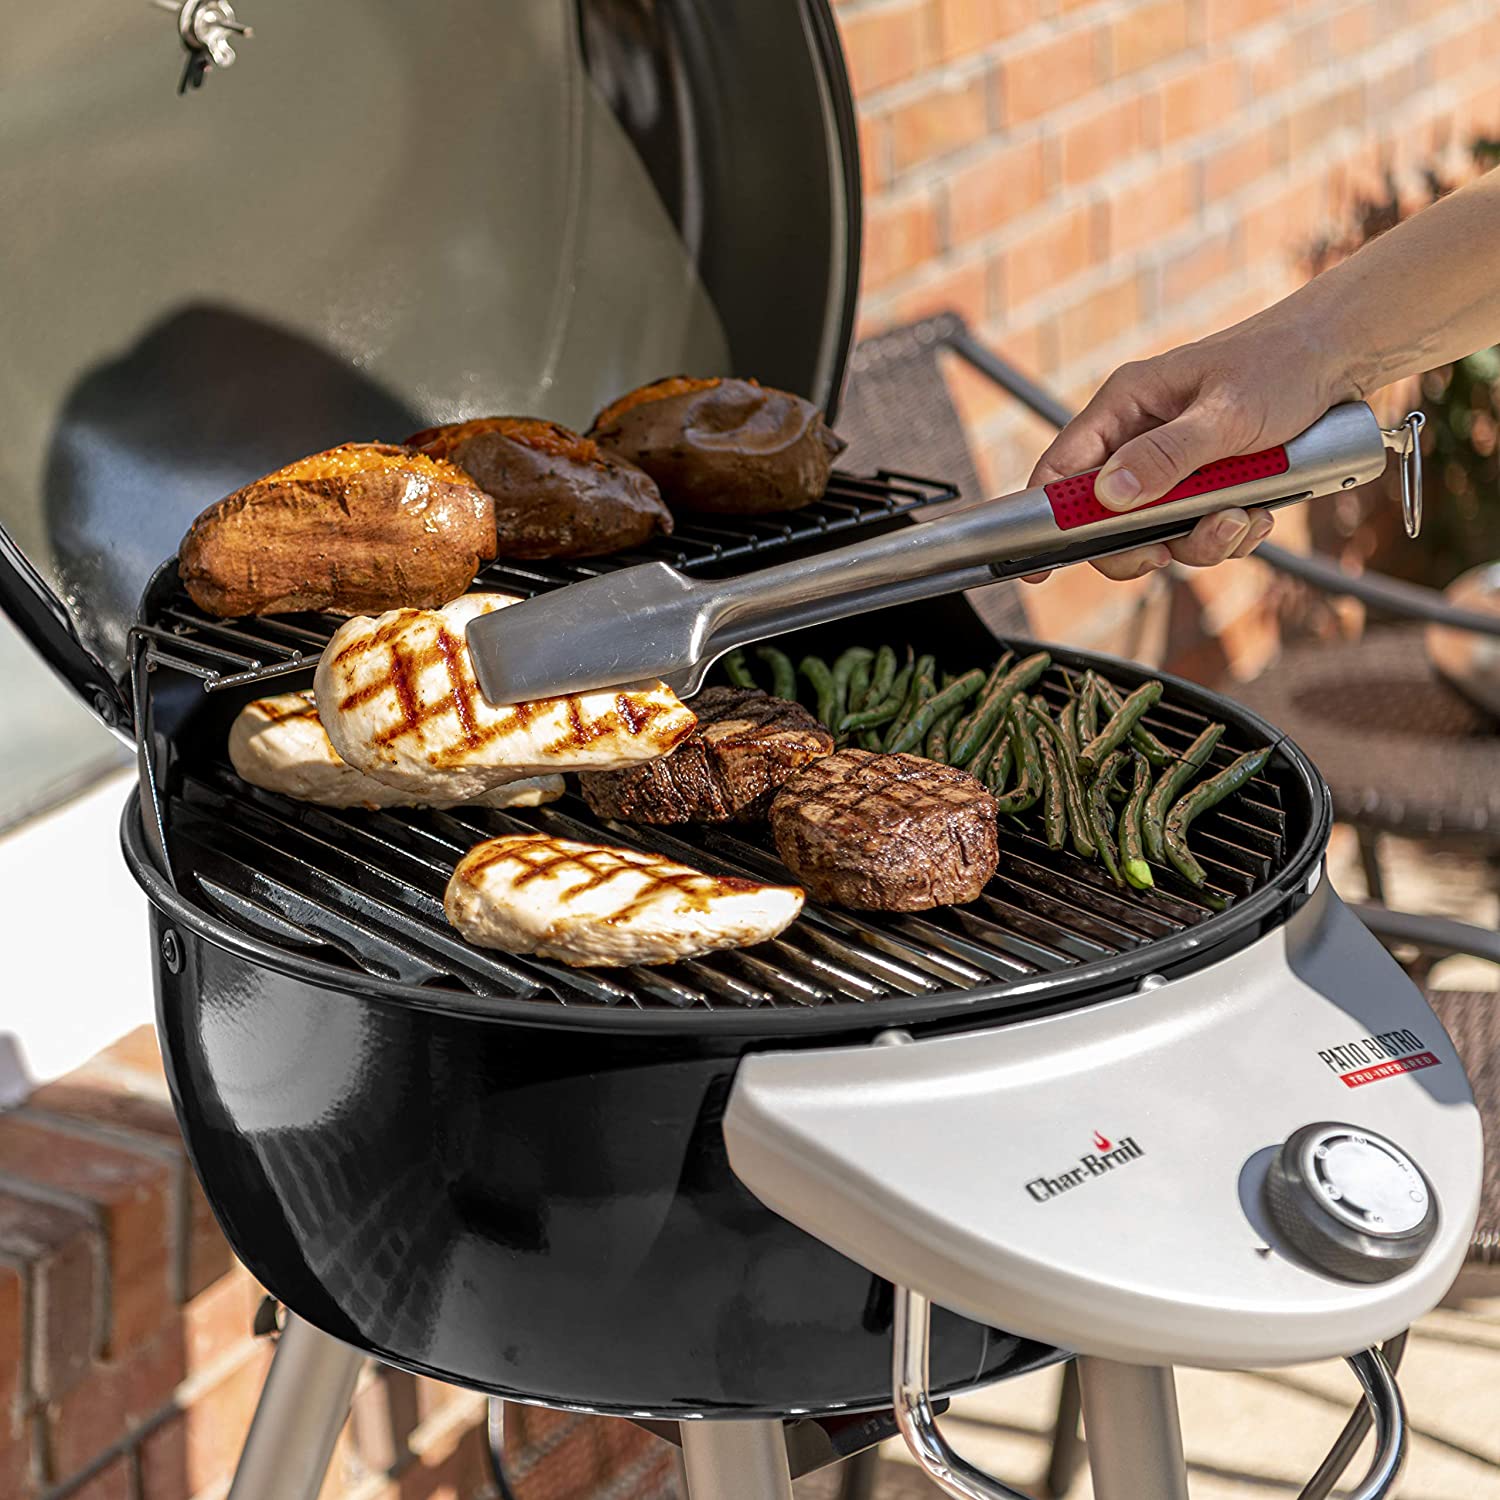 Char-Broil Patio Bistro TRU-Infrared Electric Grill in use